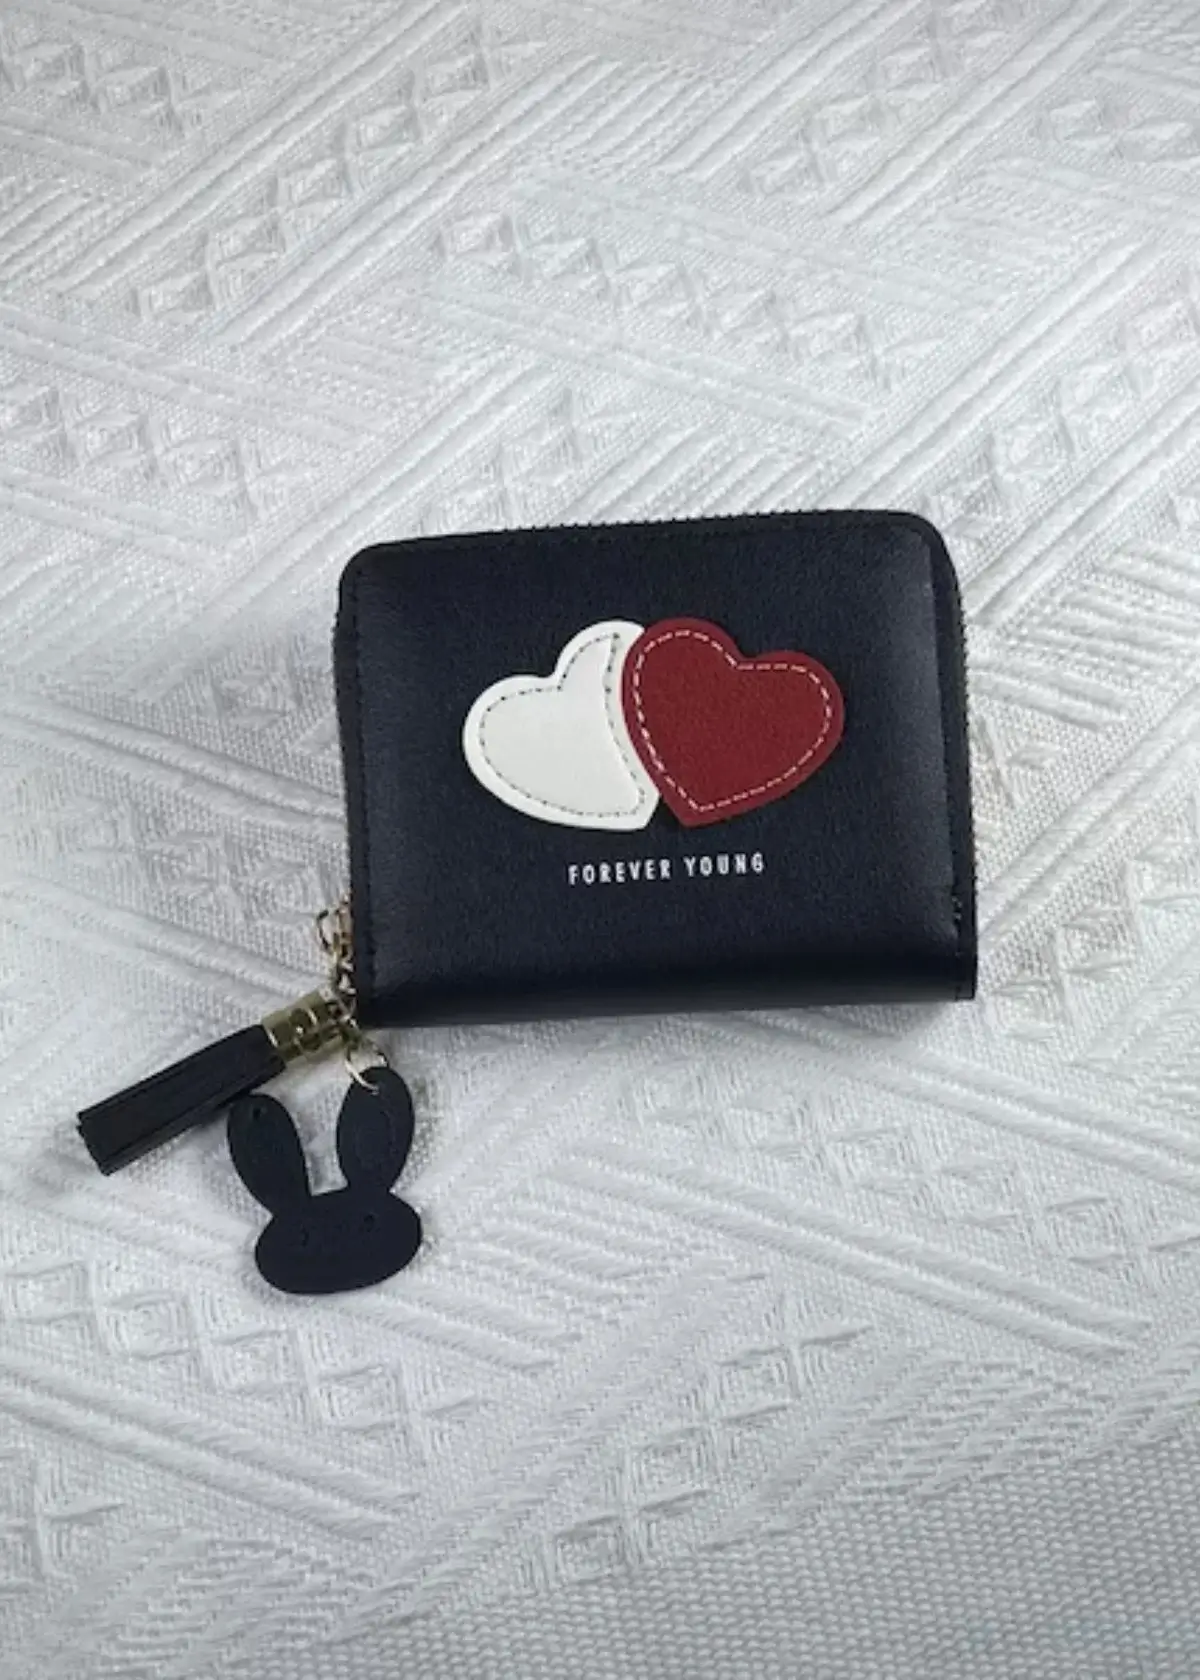 How to choose the right heart wallet 